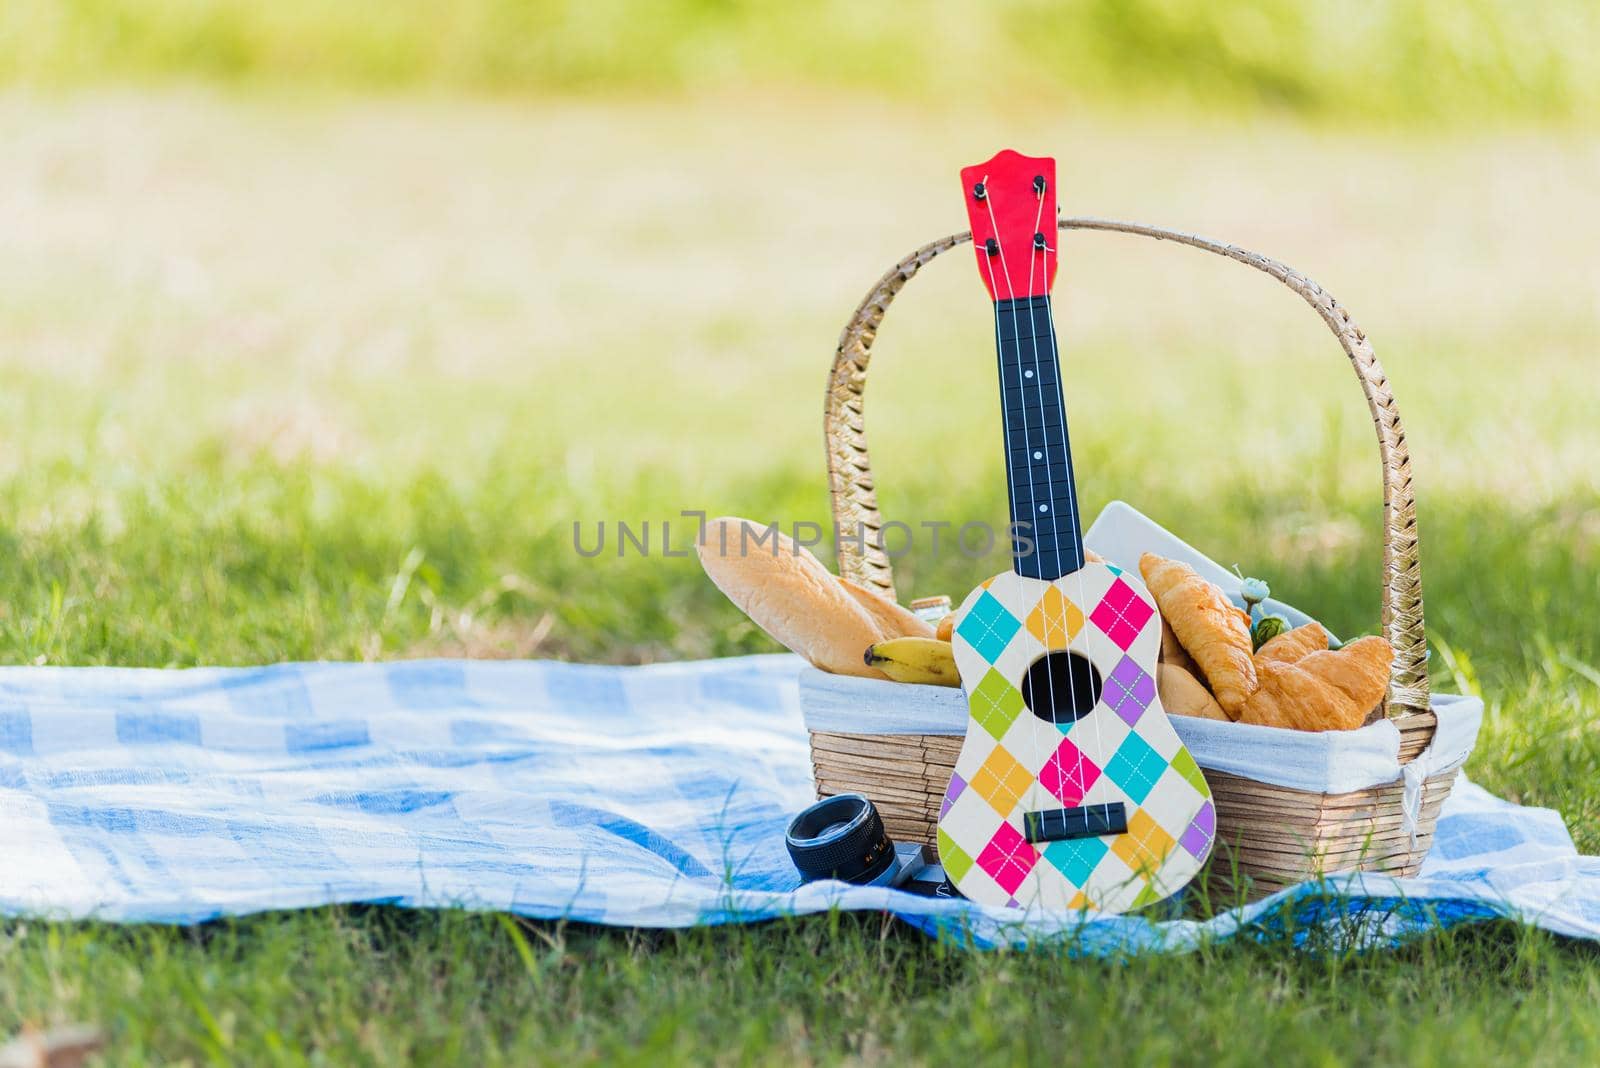 Picnic wattled basket with bread food and fruit, Ukulele, a retro camera on blue cloth in green grass garden with copy space at sunny summertime